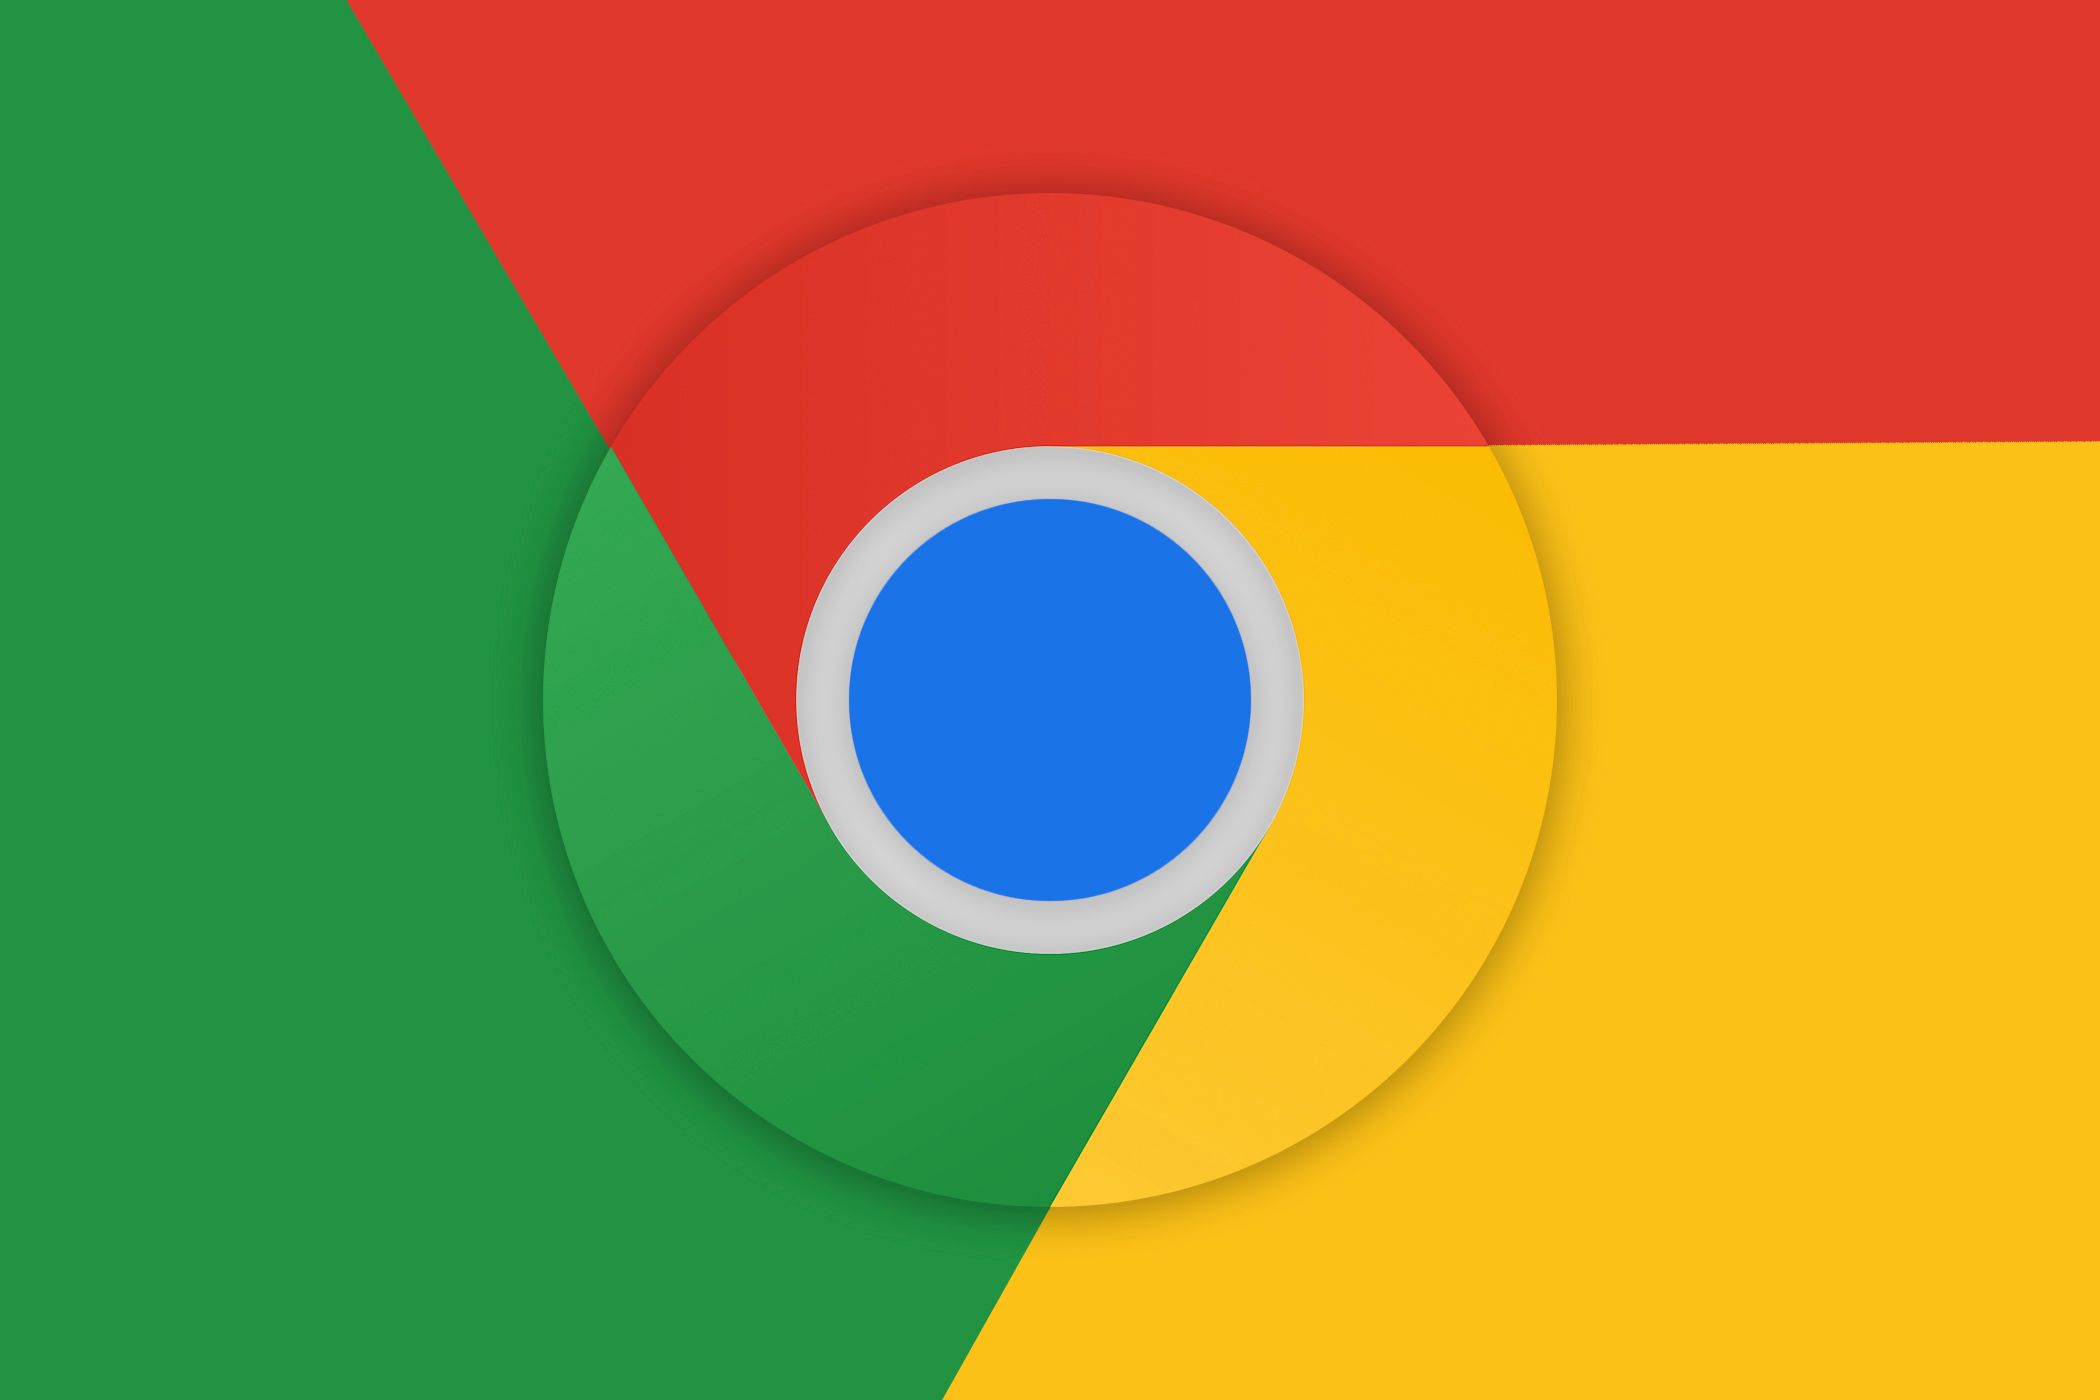 The Google Chrome logo on a colorful background.